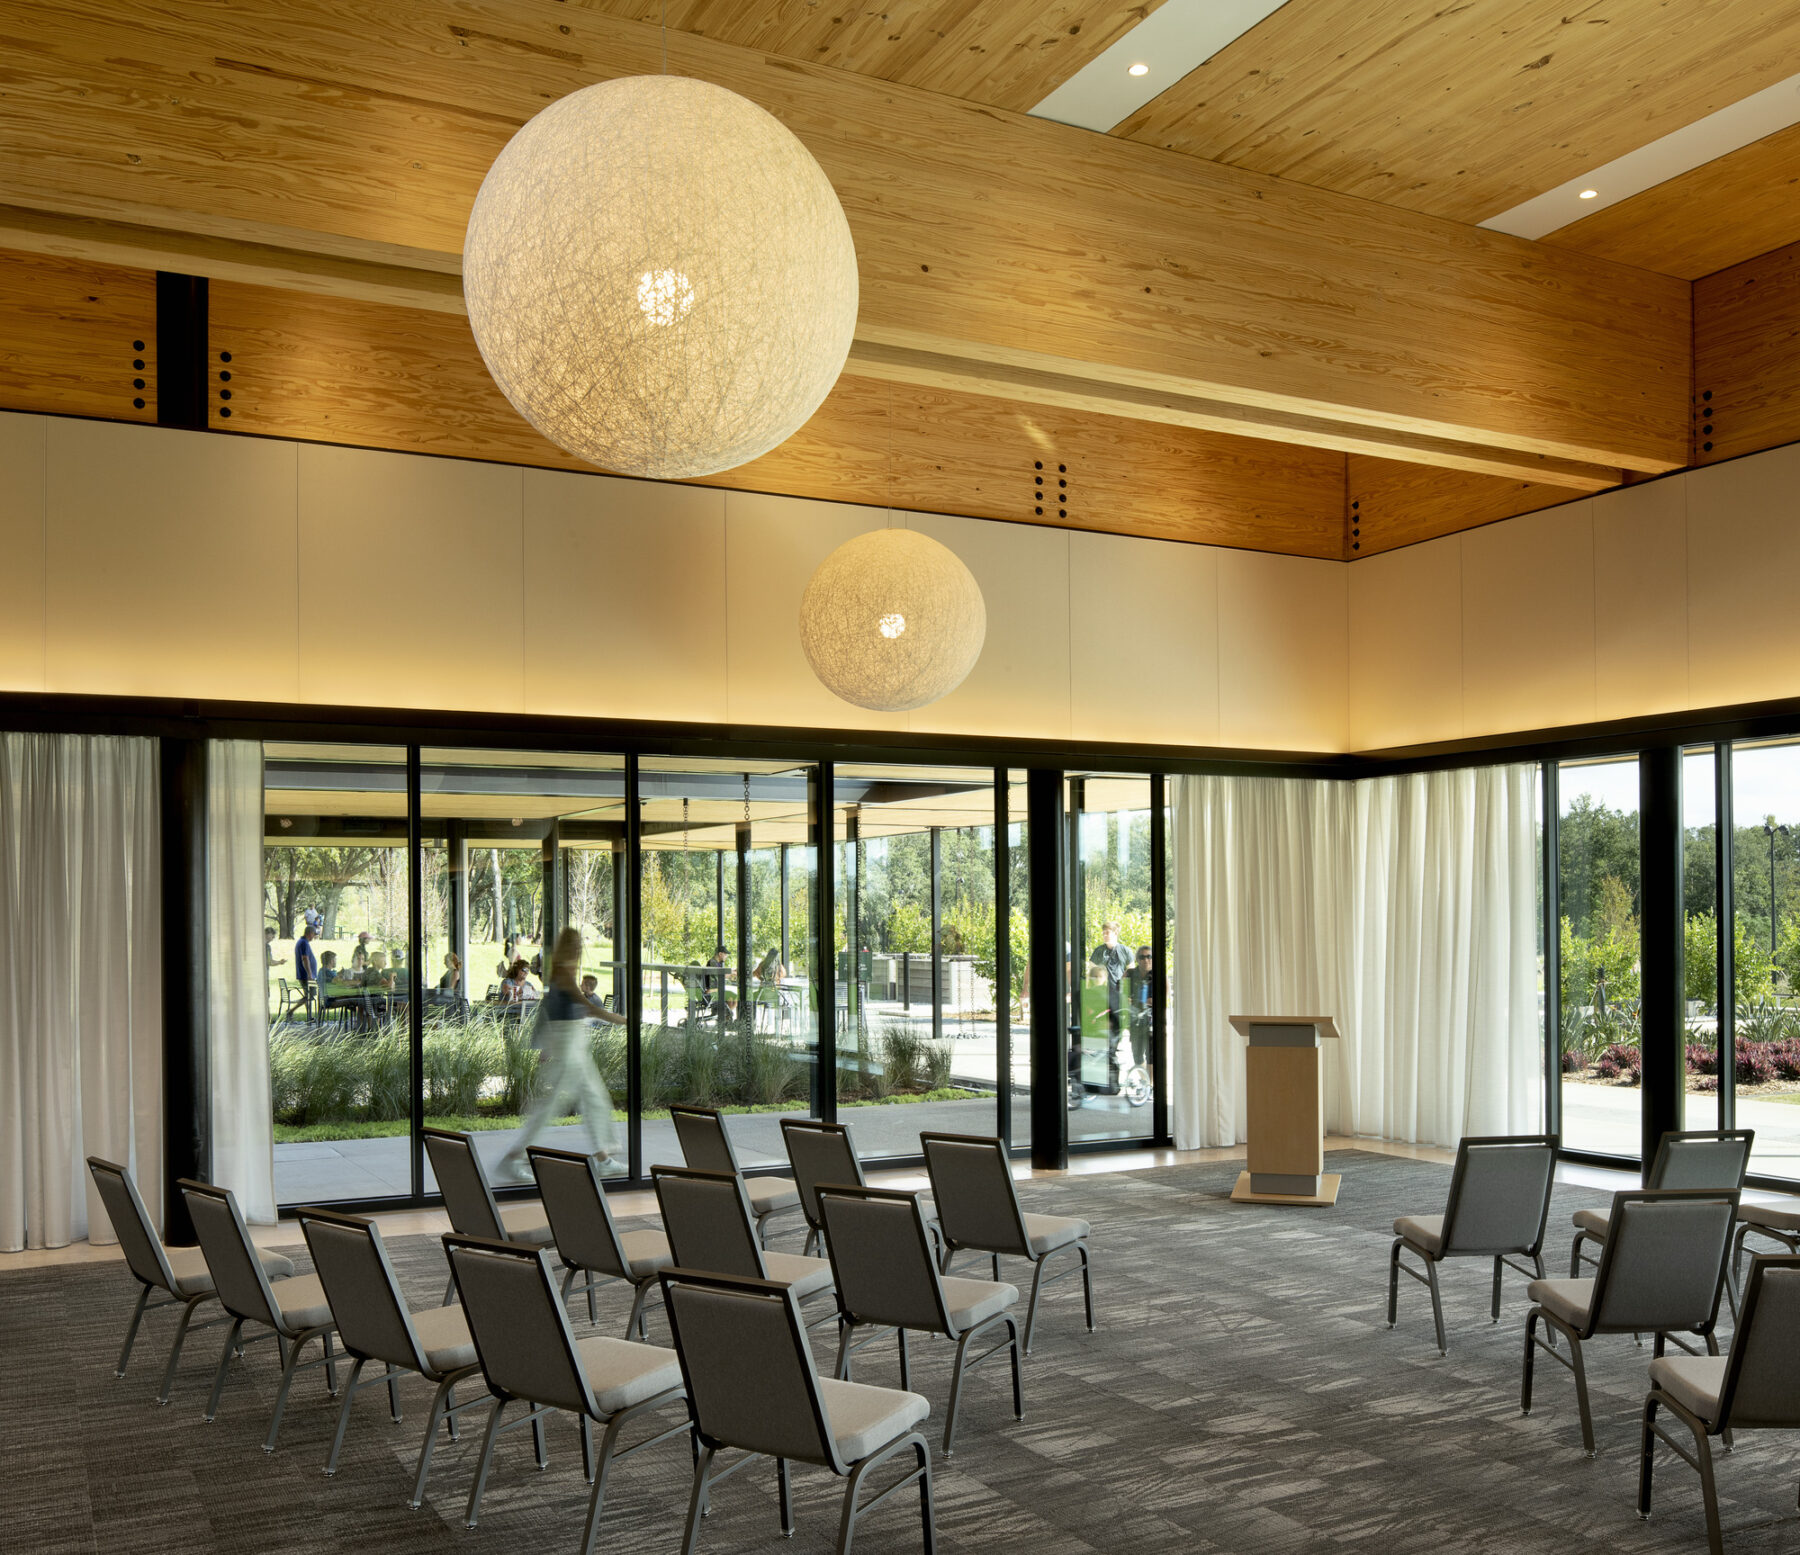 photograph of mian banquet hall of event center featuring globe light fixtures and exposed wood structures